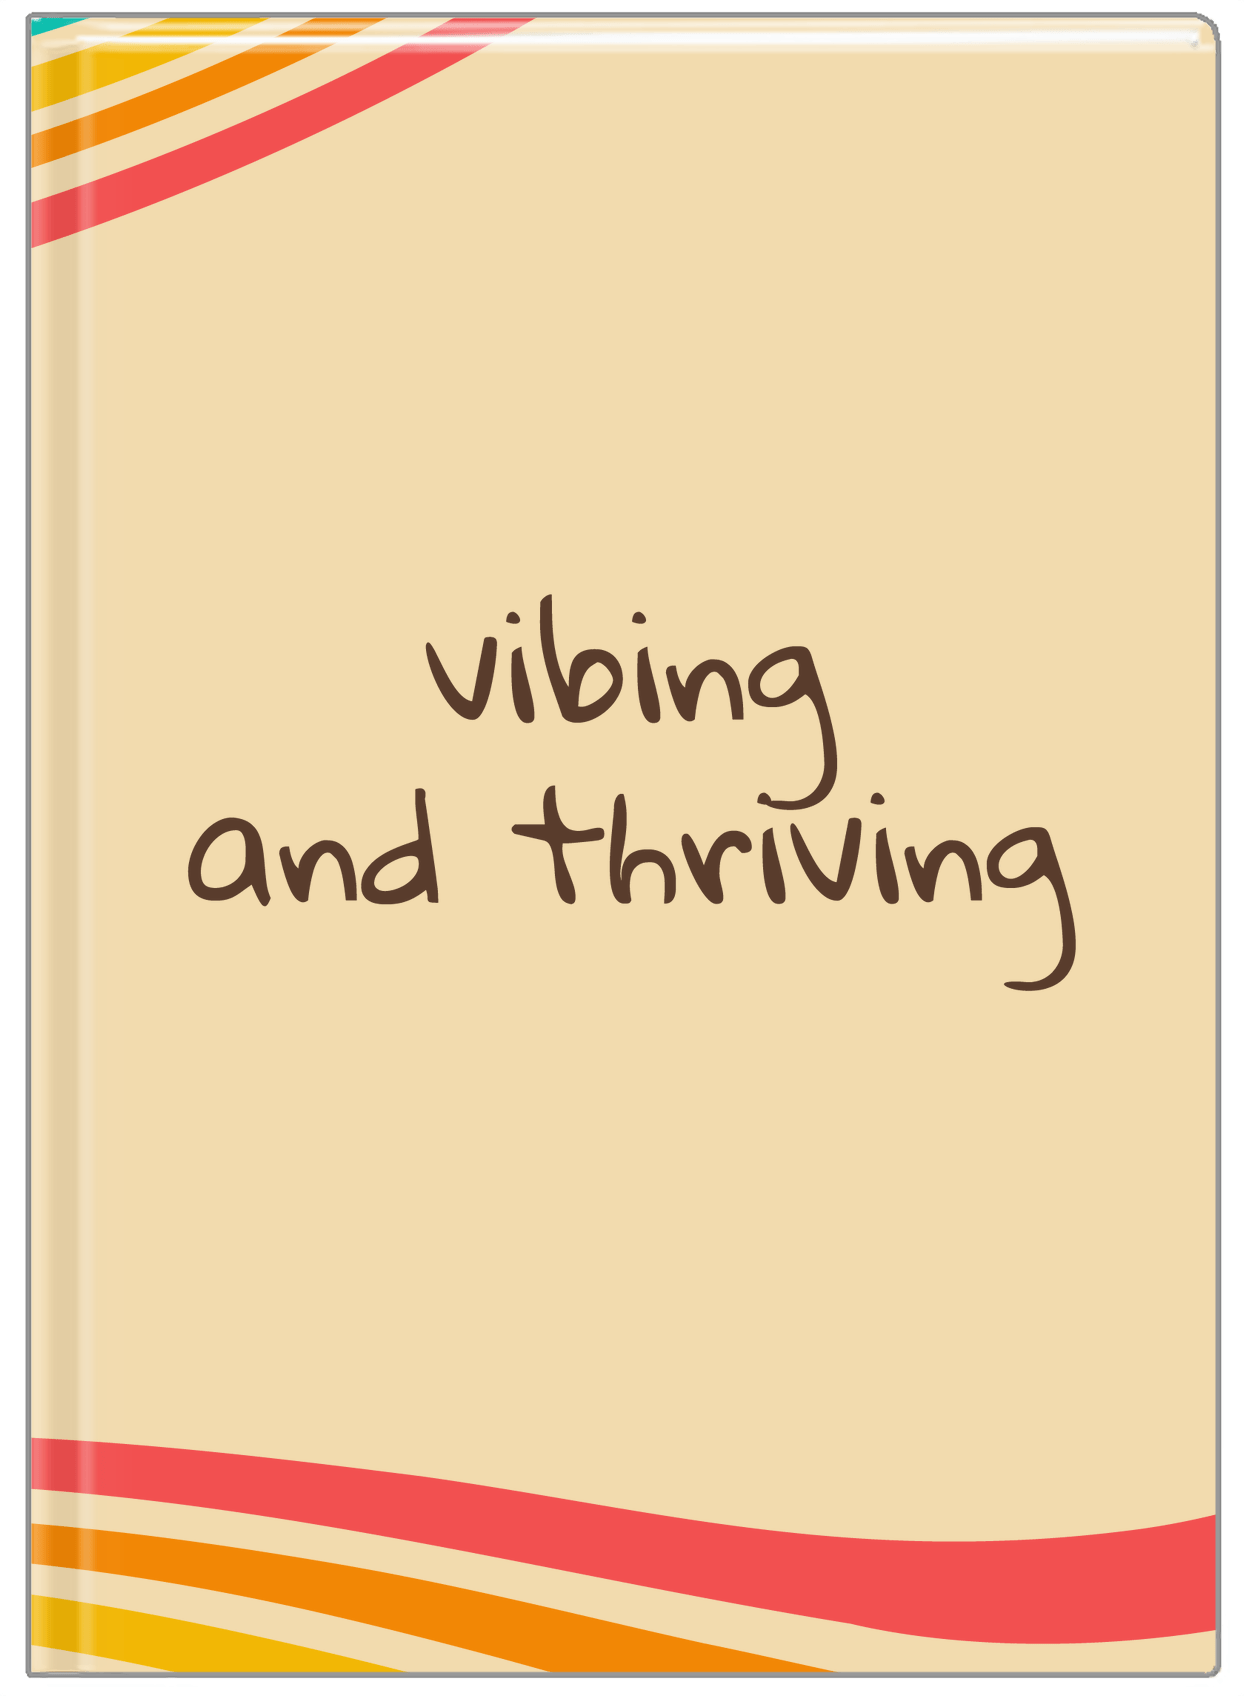 Retro Vibing and Thriving Journal - Front View